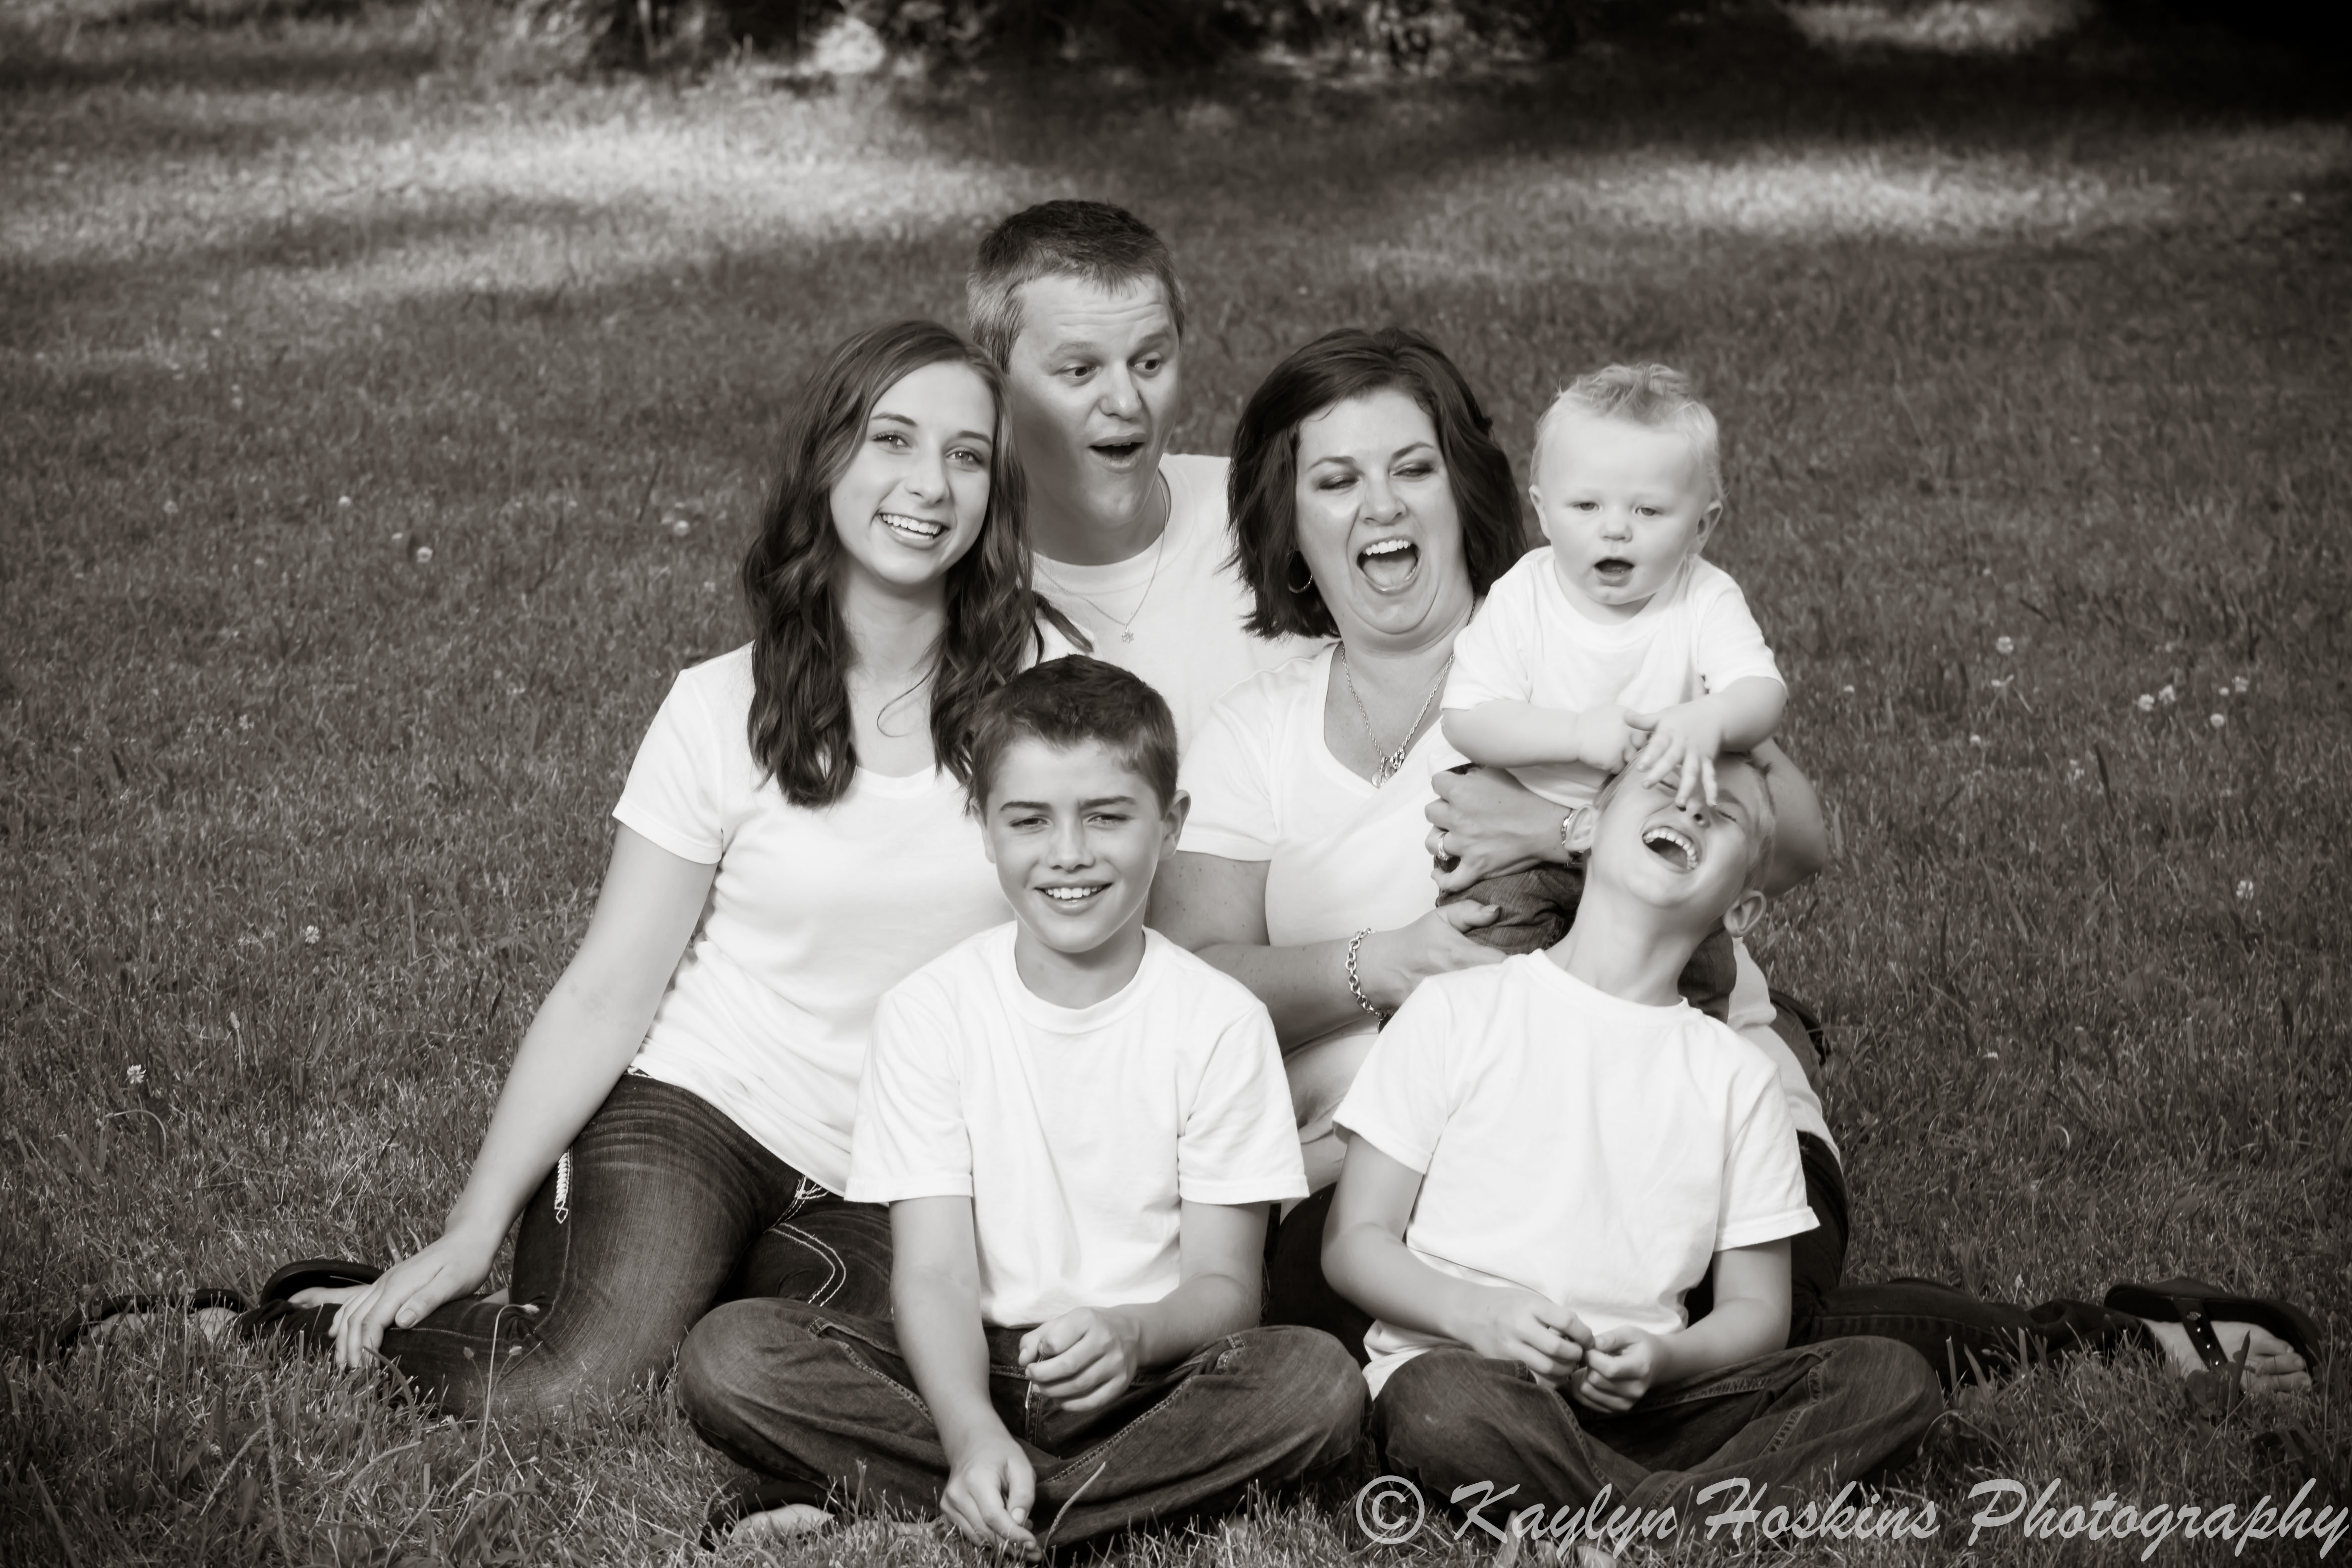 Young son pulls older brother's hair during family pictures with Kaylyn Hoskins Photography